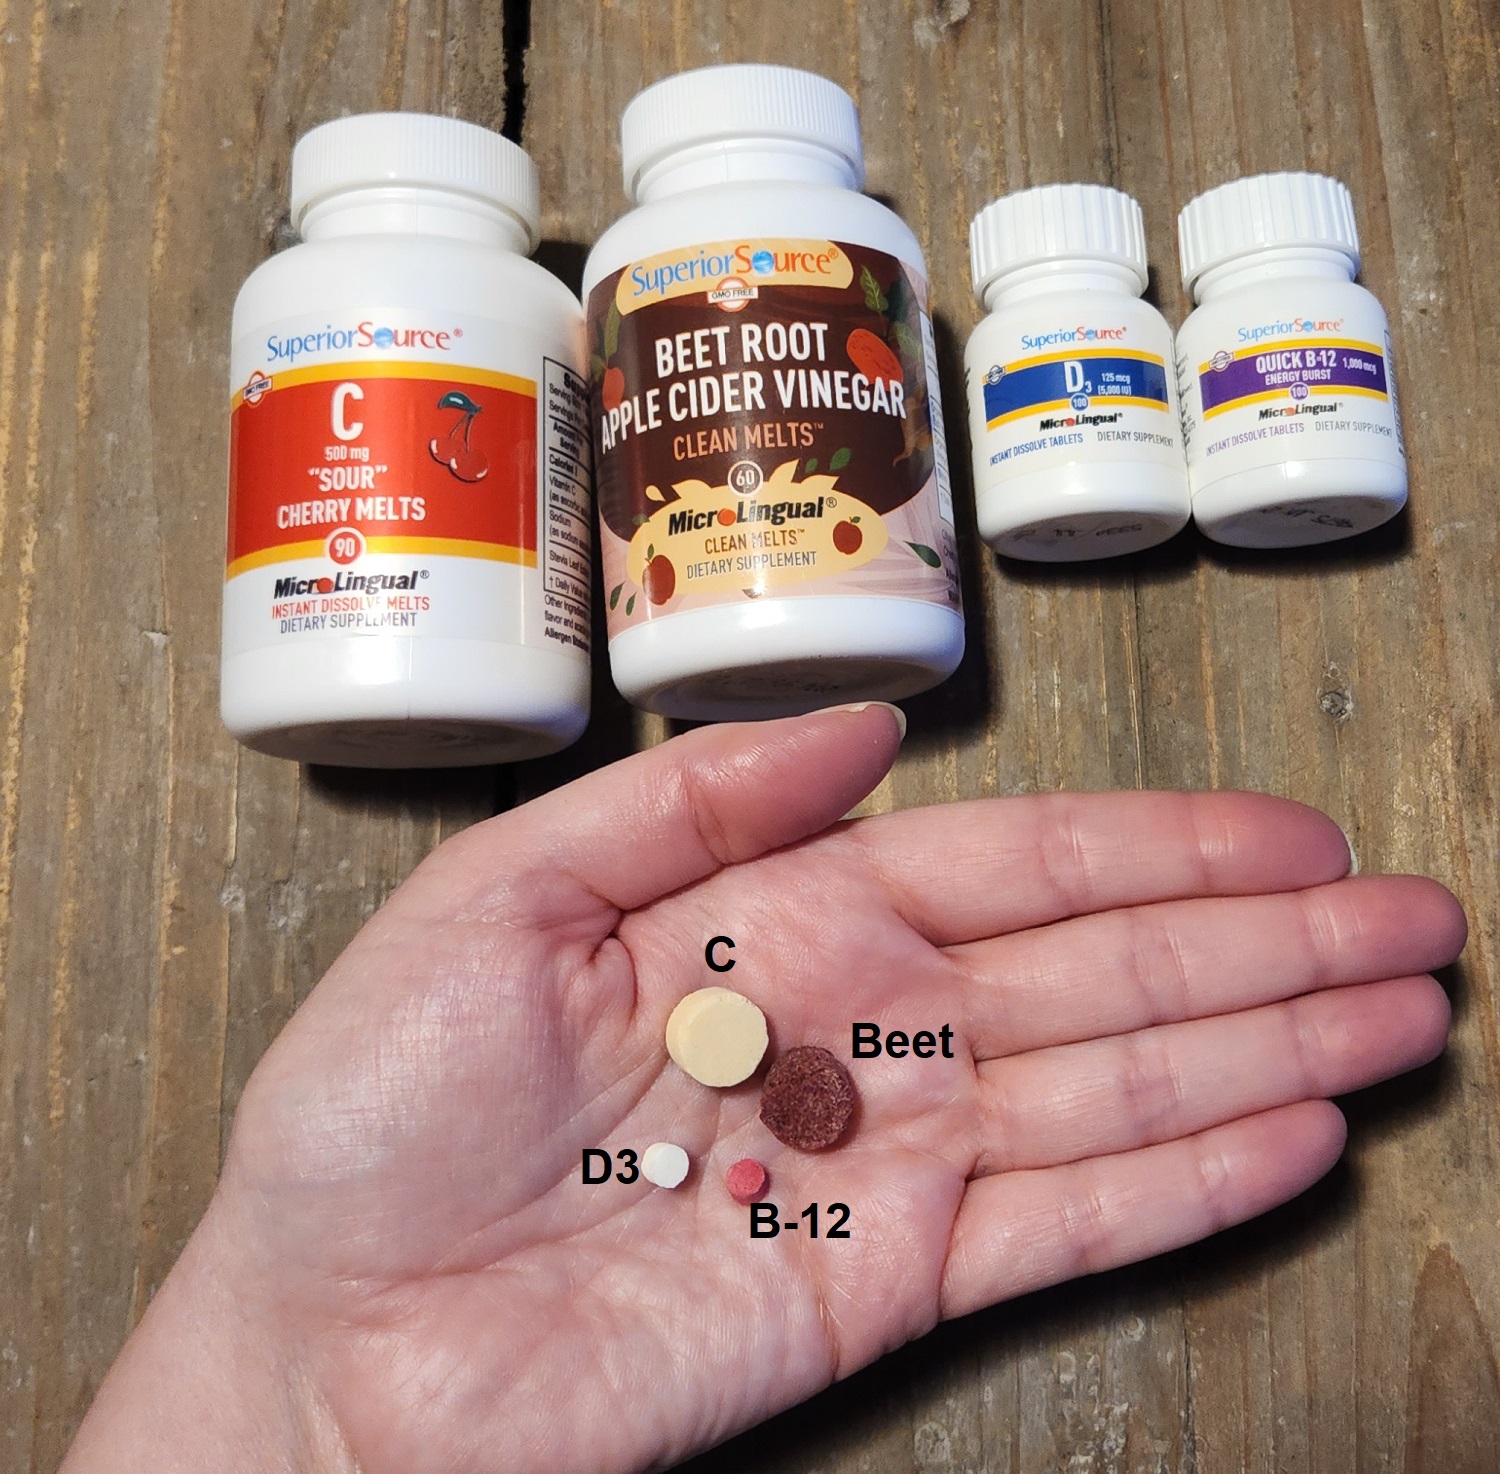 SSV bottles in back flat hand holding pills in hand all with wood background